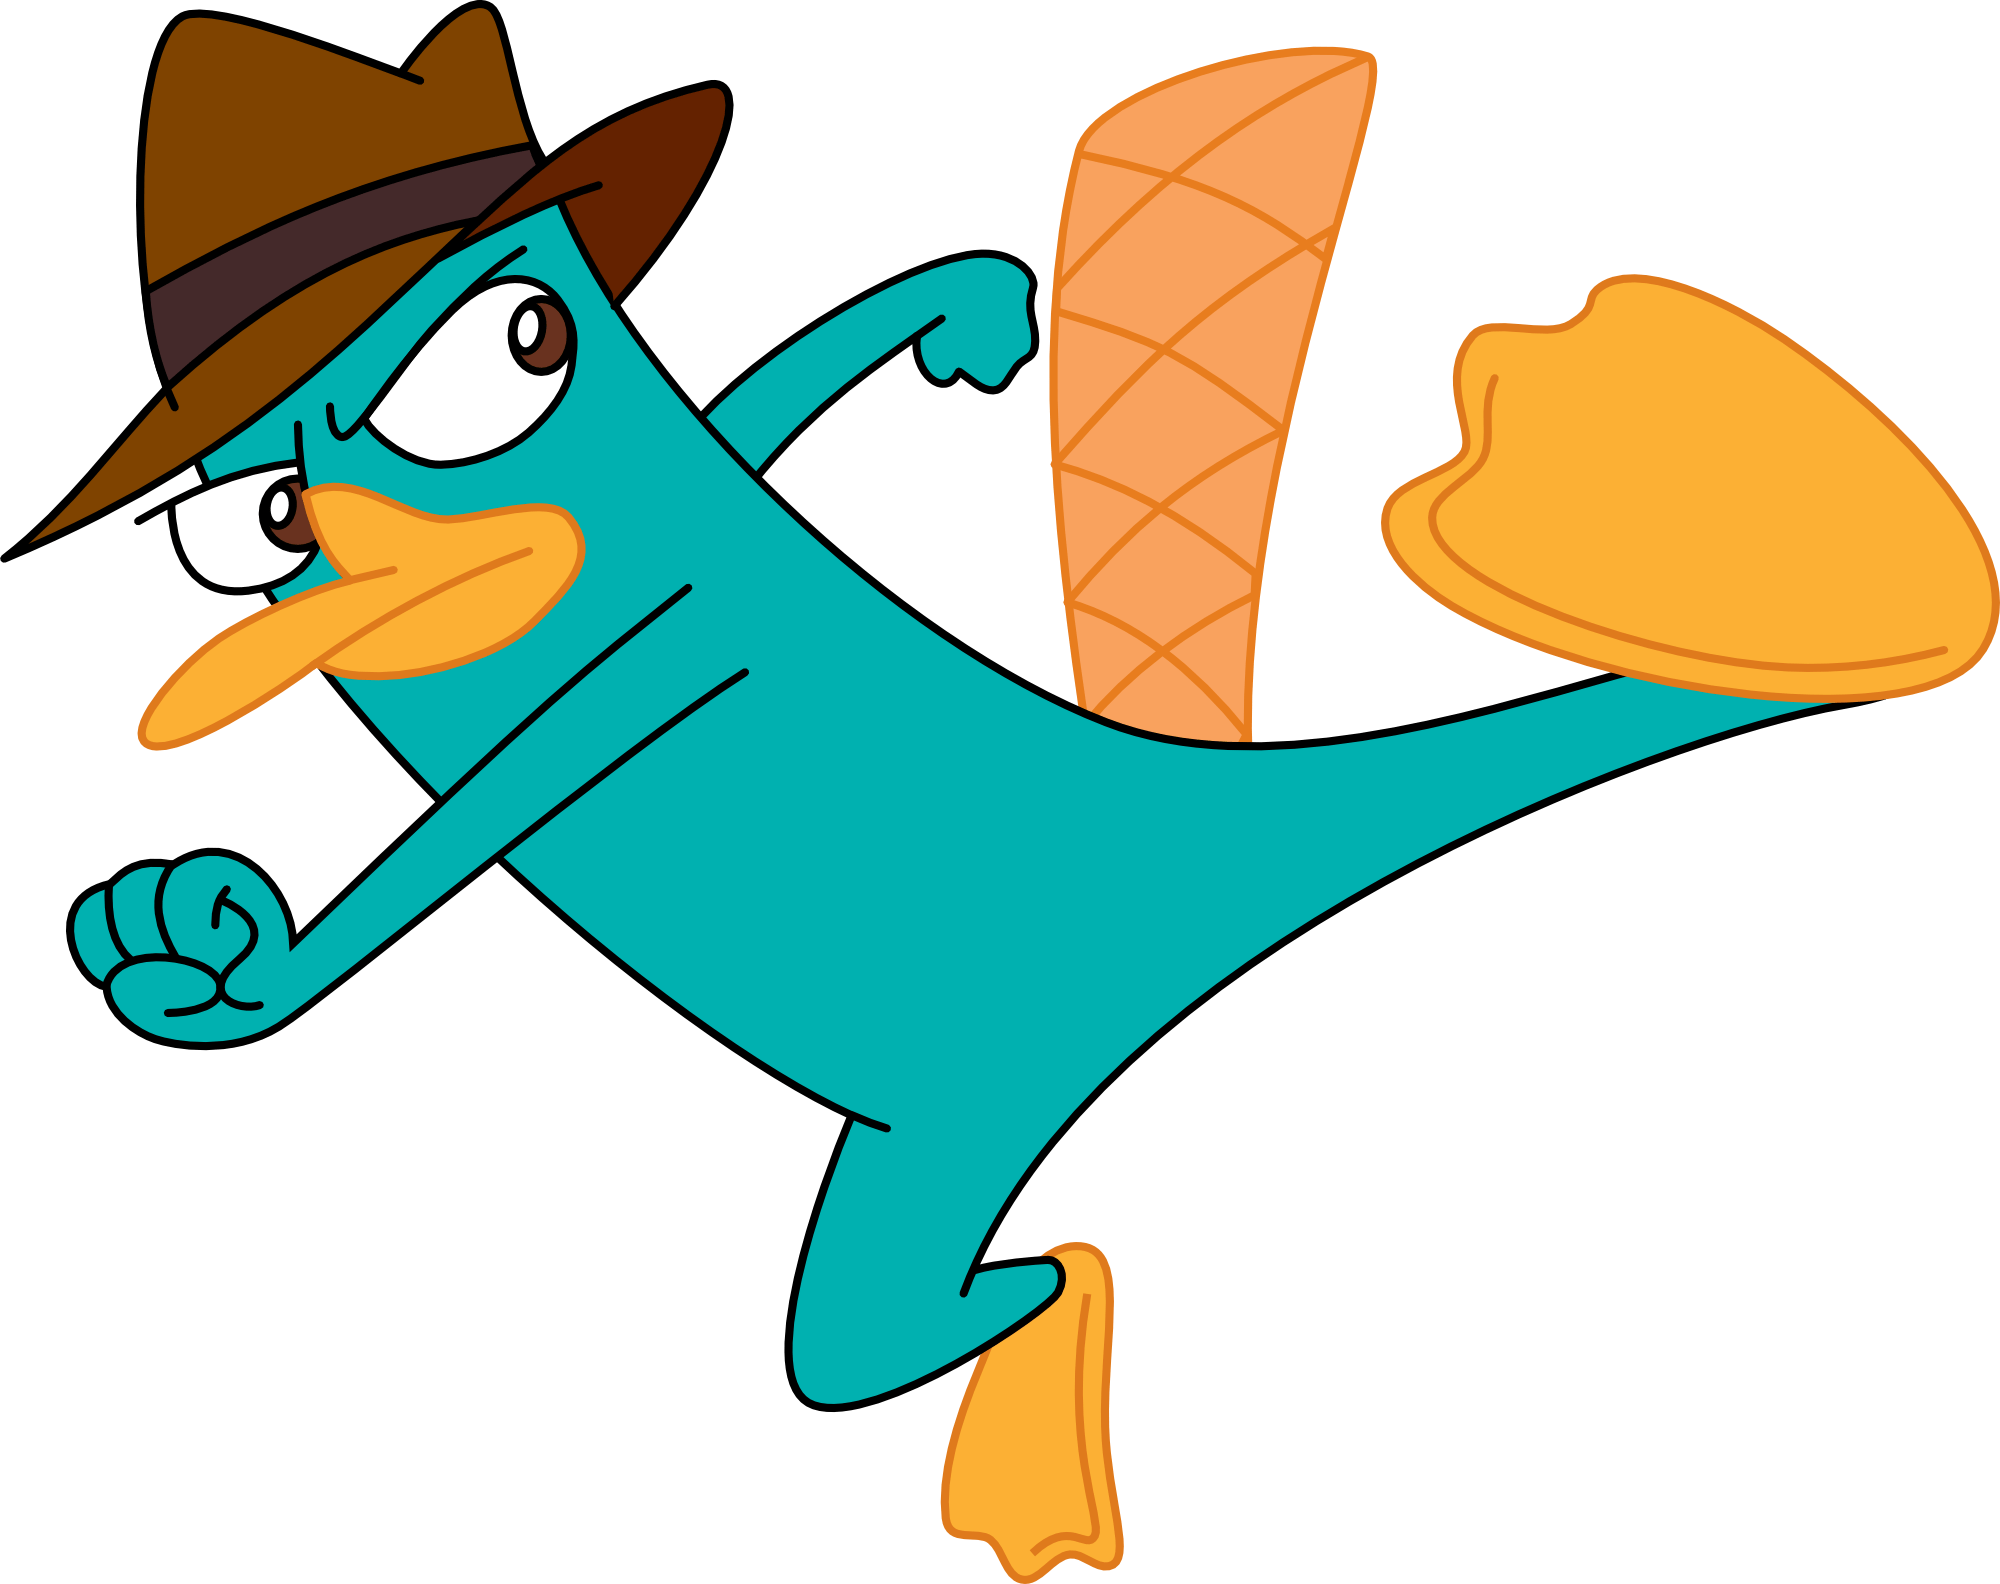 Perry The Platypus Wallpapers Top Free Perry The Platypus Backgrounds Wallpaperaccess